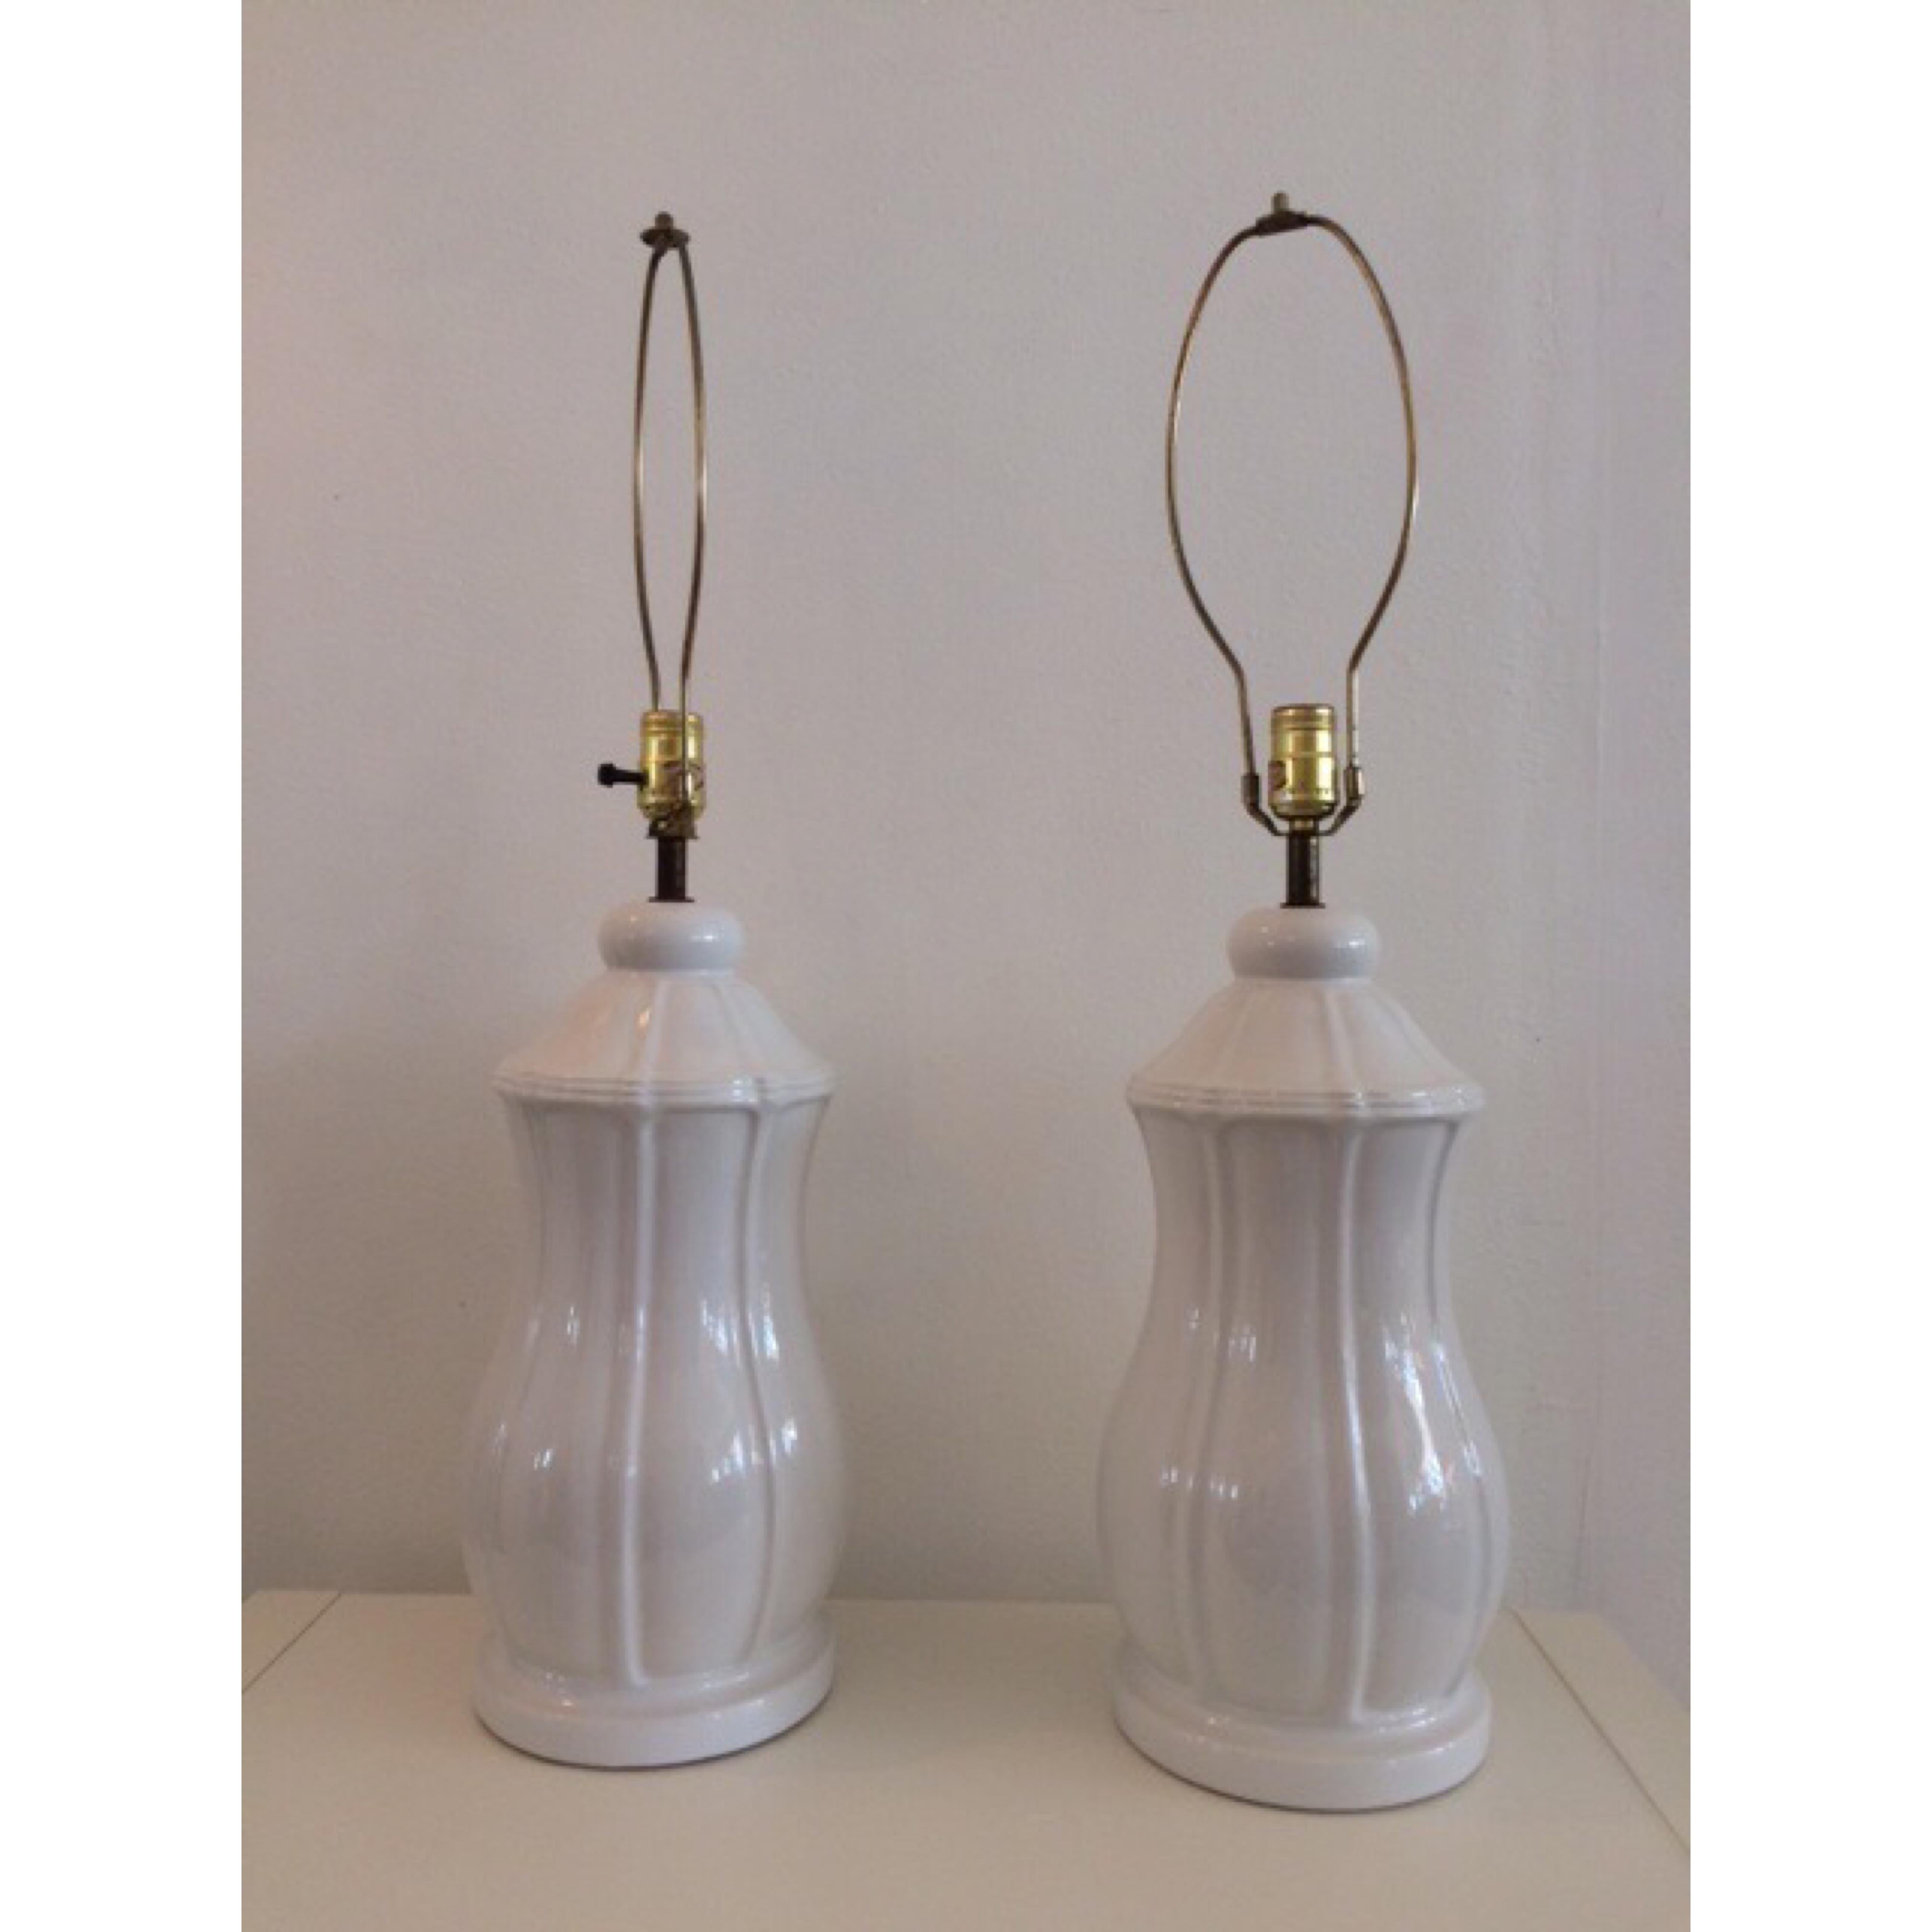 A very special pair of vintage Hollywood Regency blanc ceramic table lamps. This is a one of kind hand made set. A great addition to any room.